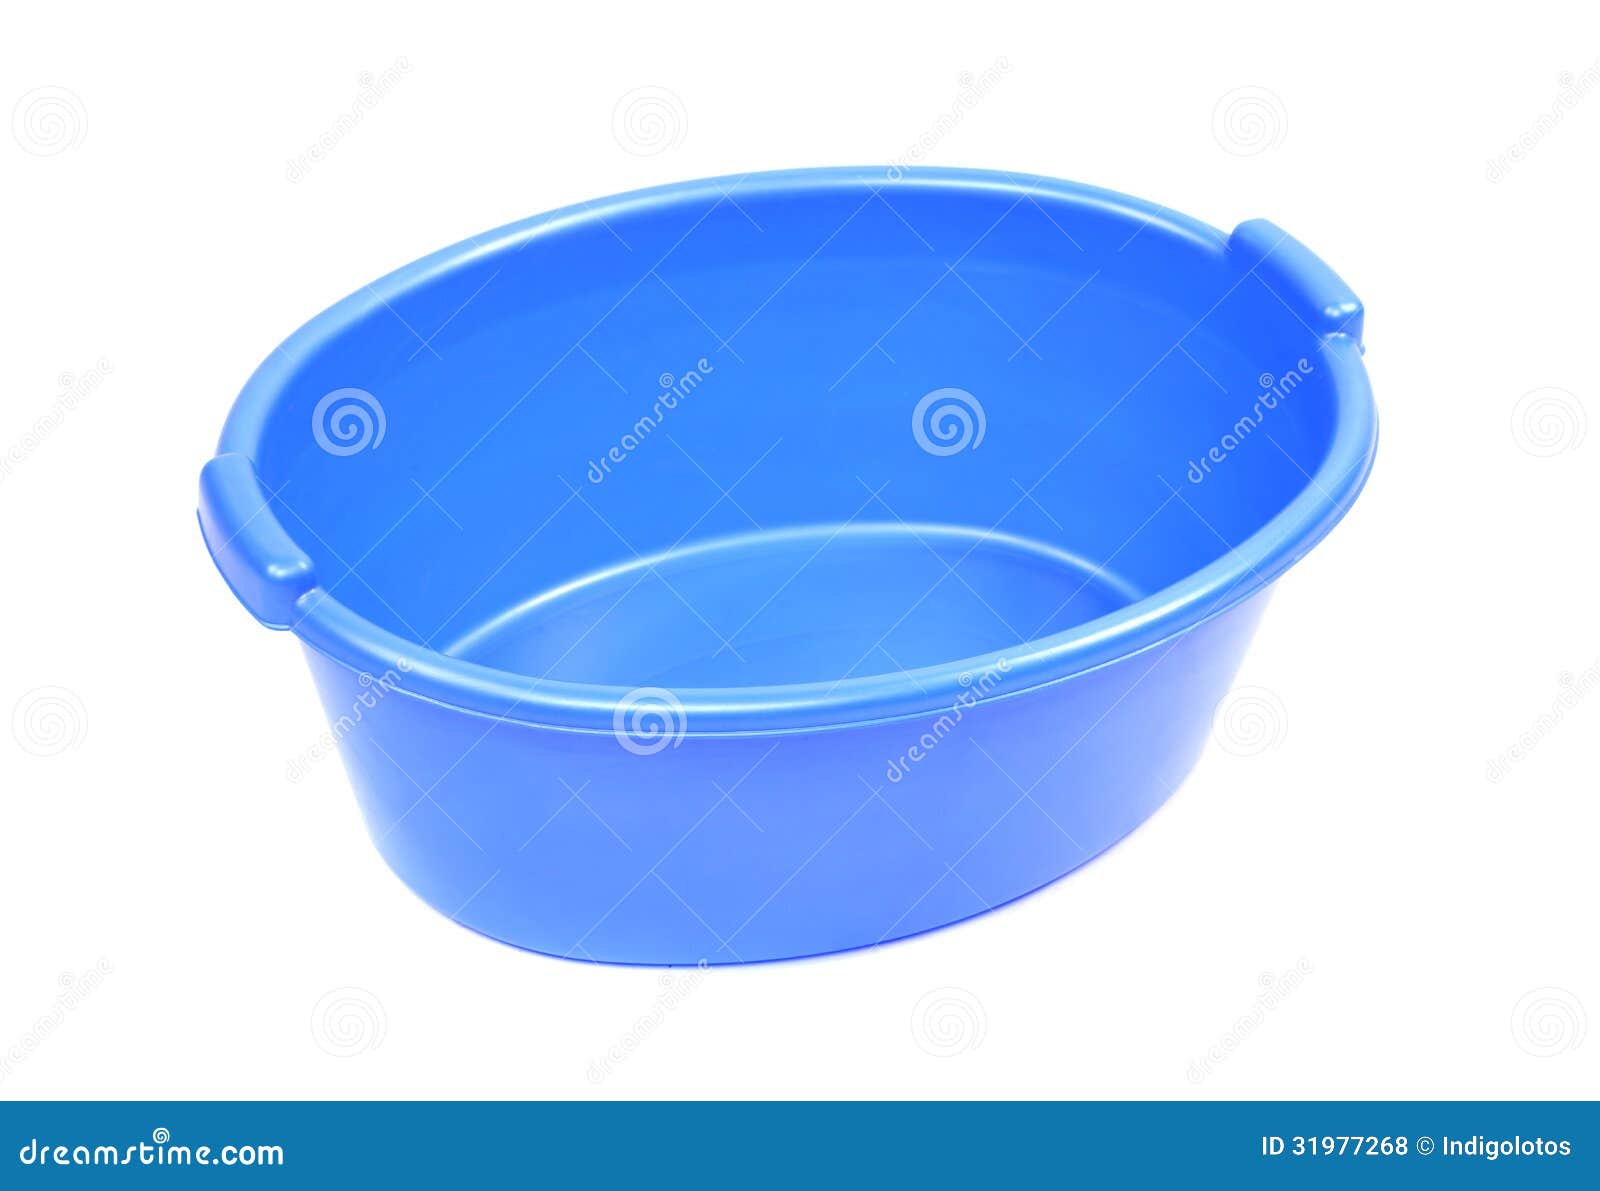 blue plastic basin,  on a white background